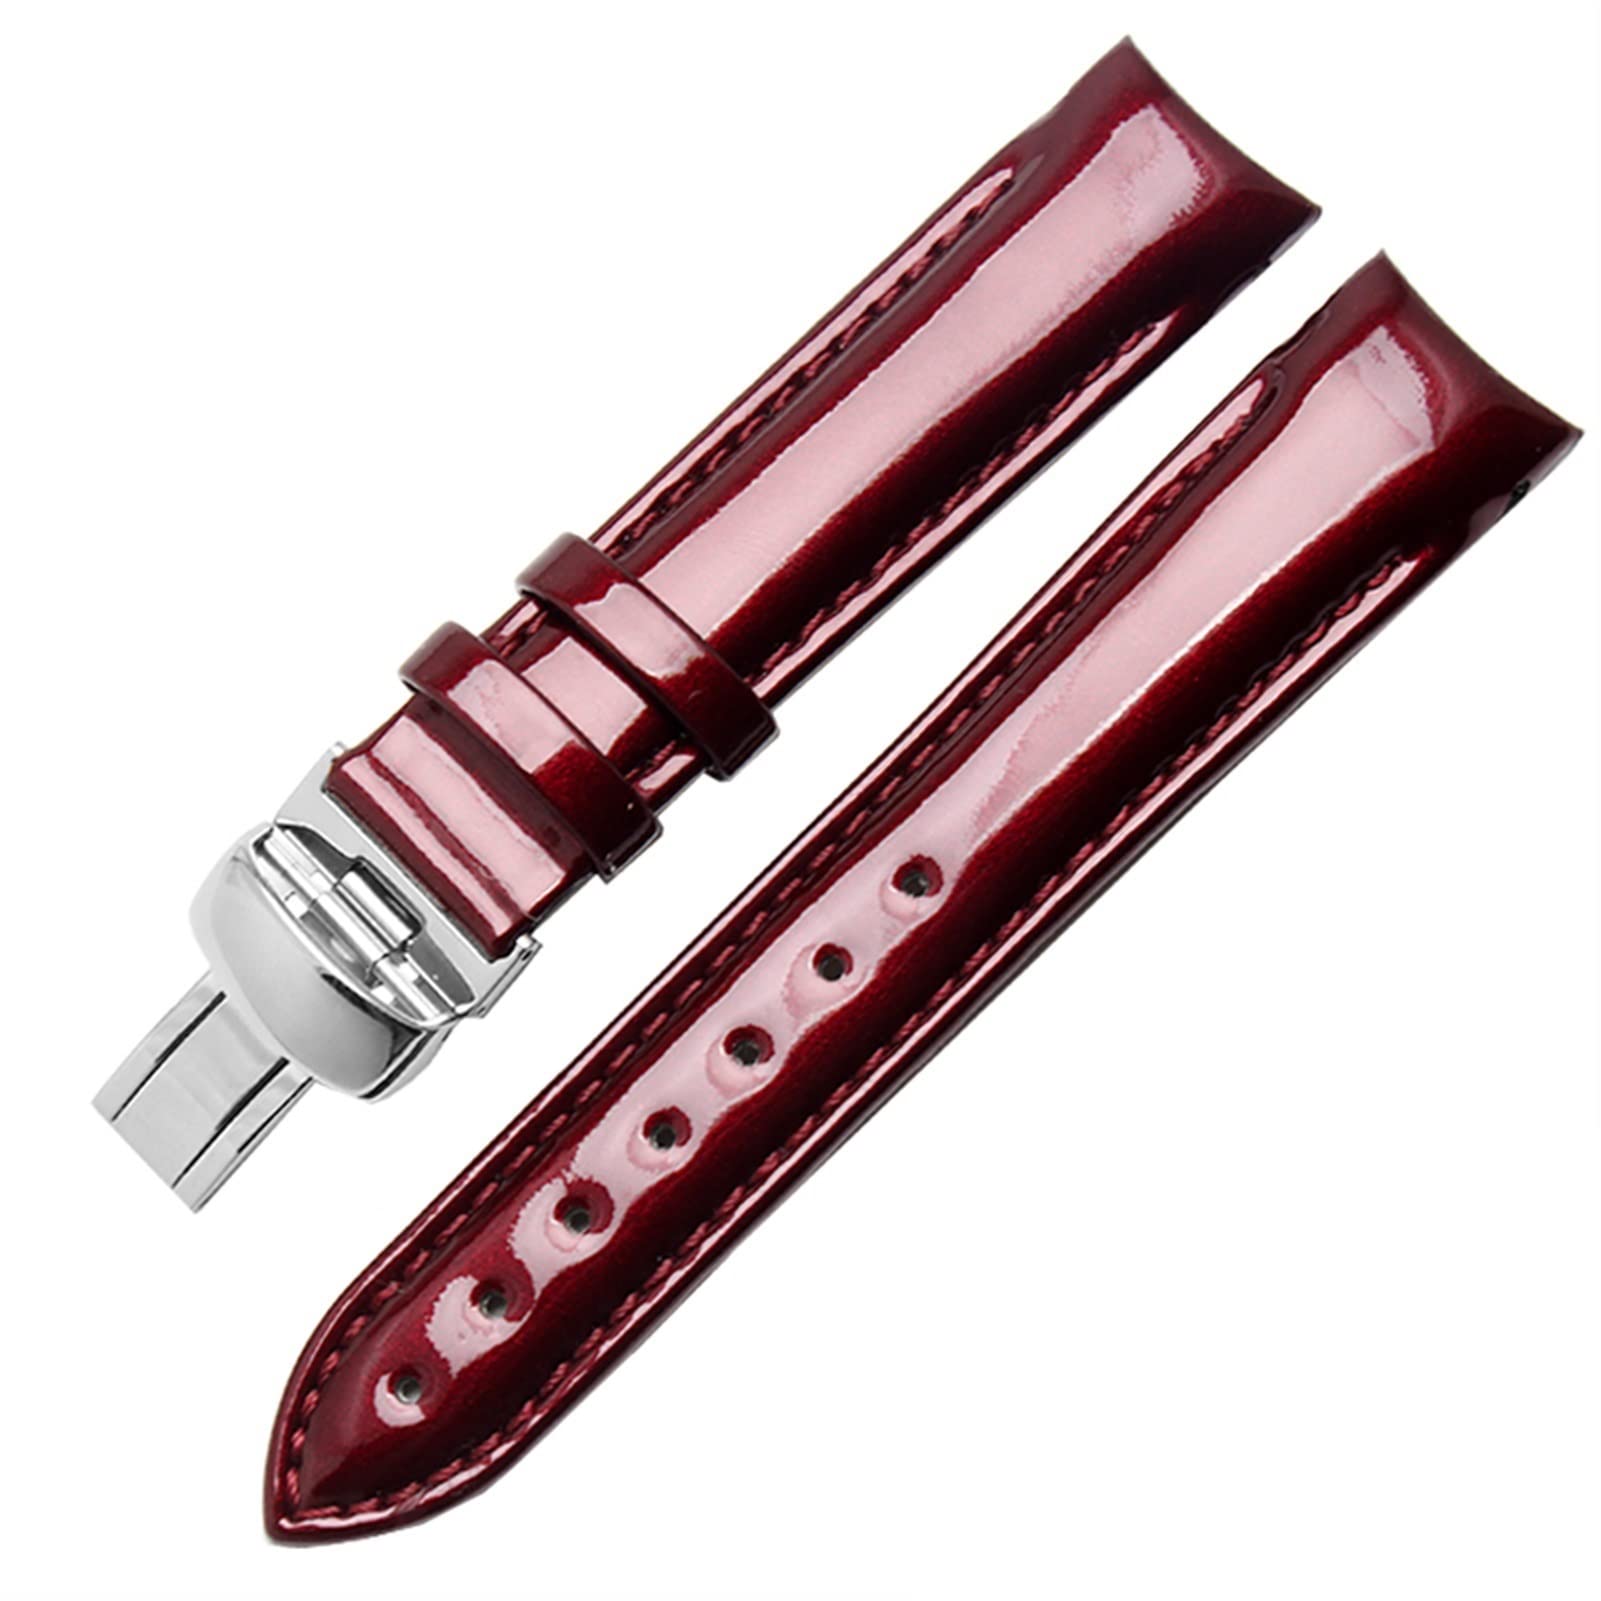 HAODEE Genuine Leather watchband for Tissot T035/T035210A Wristband Women Curved end Straps 18mm Fashion Bracelet (Color : Purple, Size : 18mm)